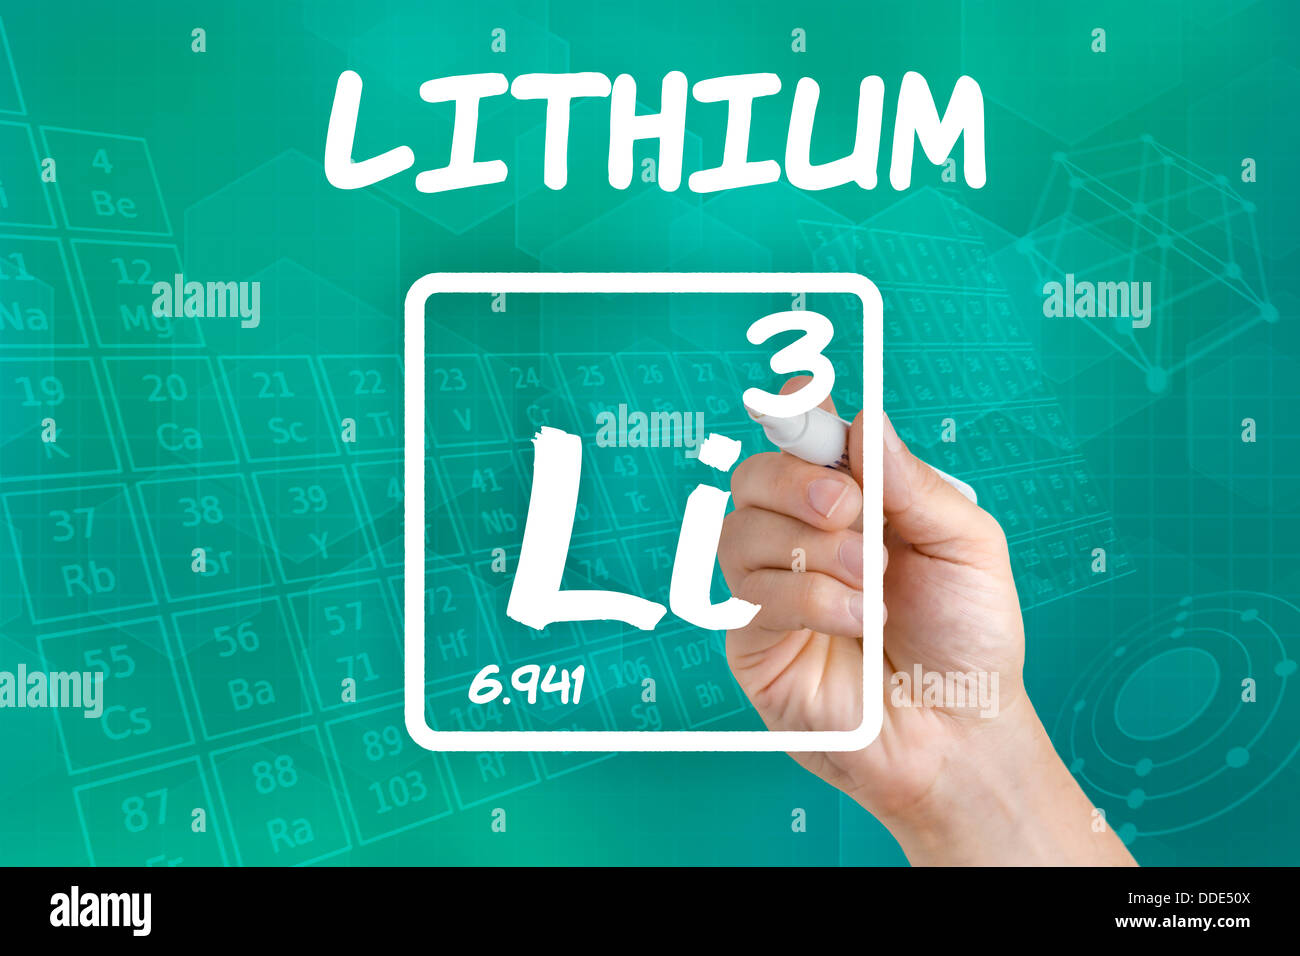 Symbol for the chemical element lithium Stock Photo